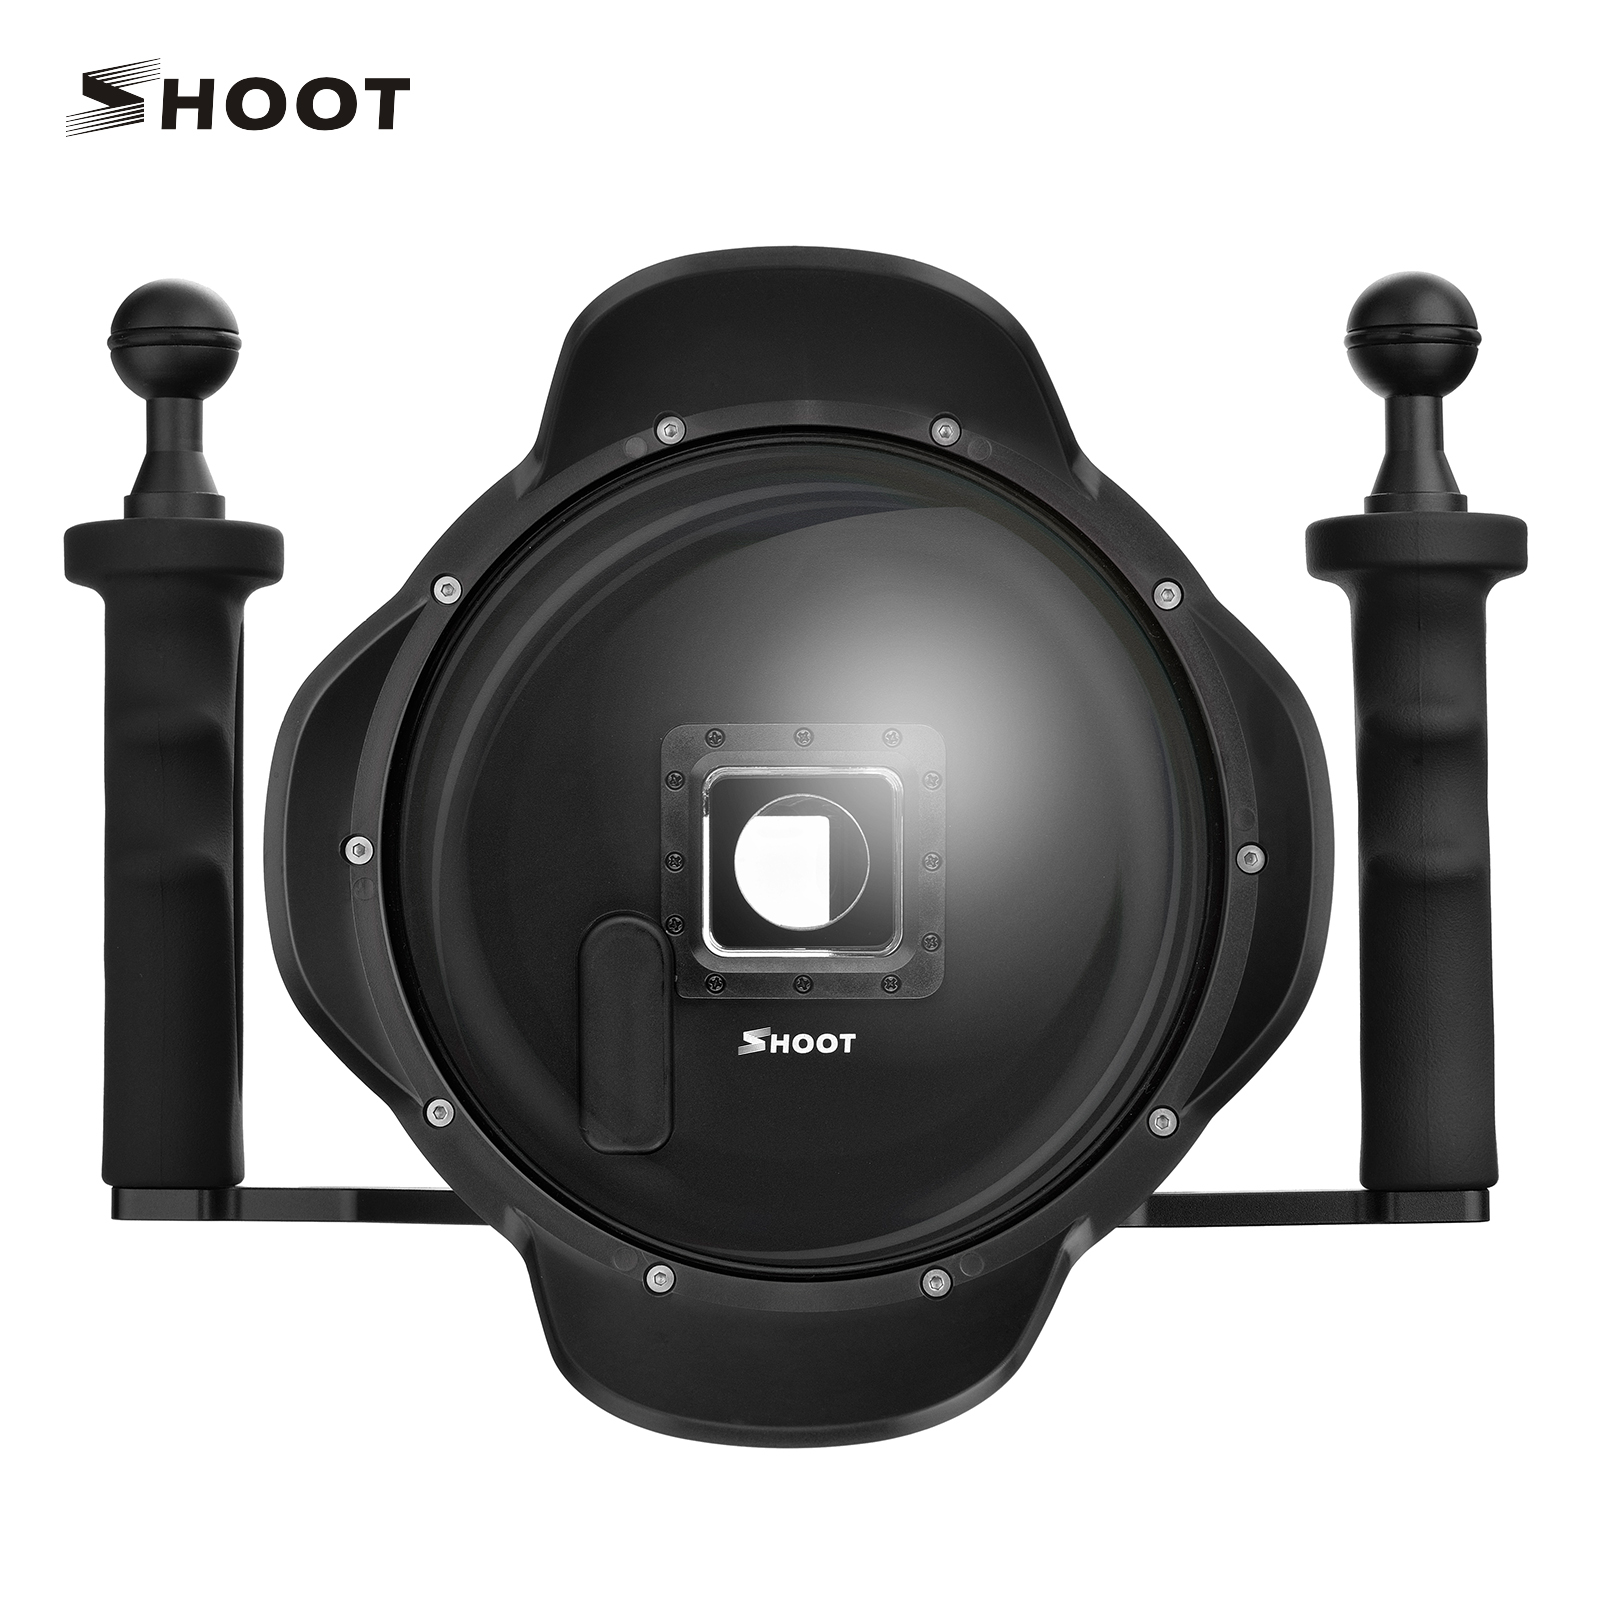 Underwater Dome Waterproof Case Lens Cover with Pistol Trigger Shutter Set GoPro Accessories for dome GoPro Hero Black White Silver Fashionapple For Gopro Dome port 